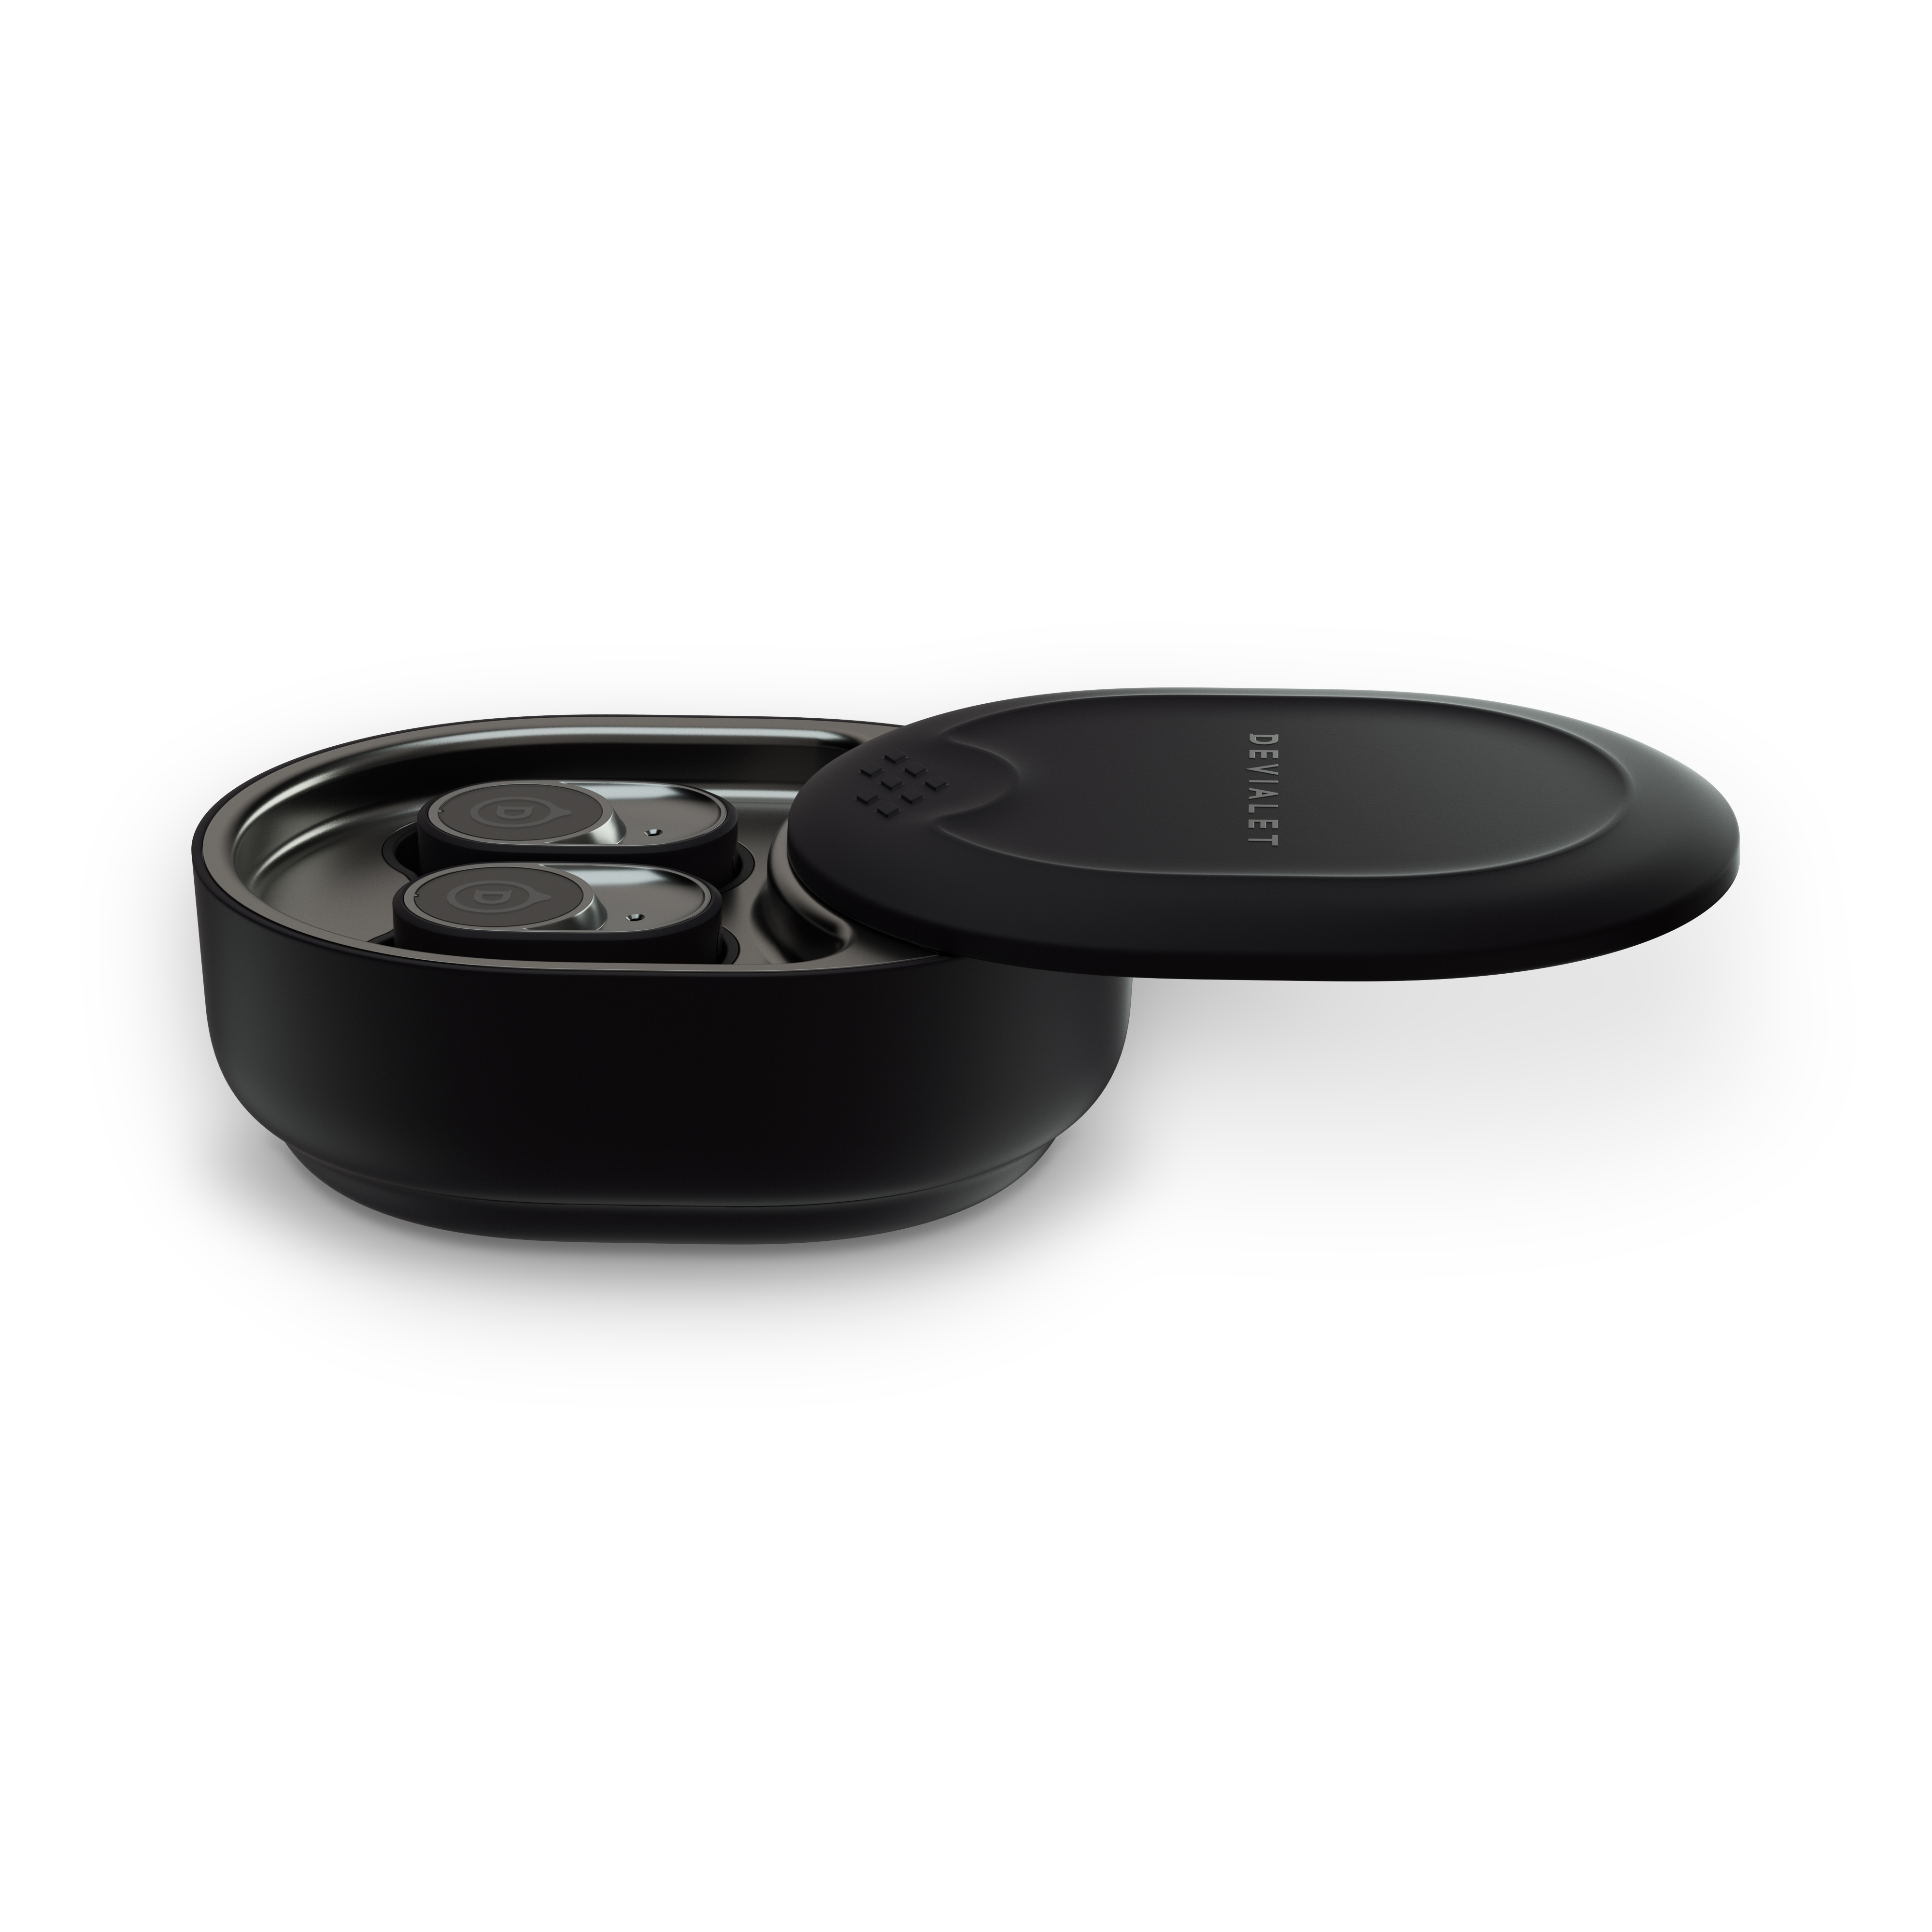 Devialet announces wireless earbuds